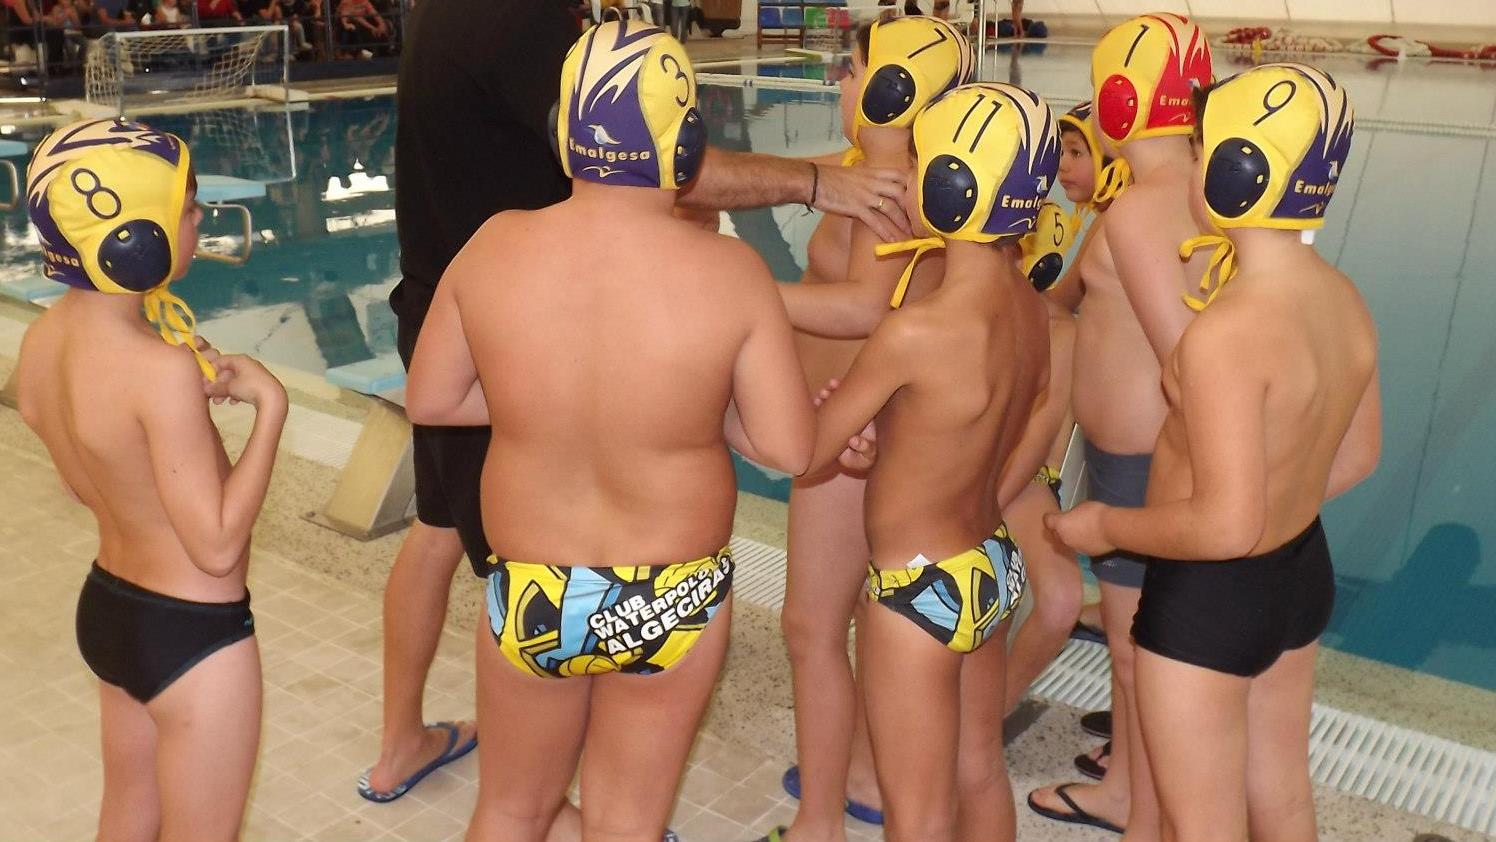 Waterpolo_Spain_Boys_are_fat_34.